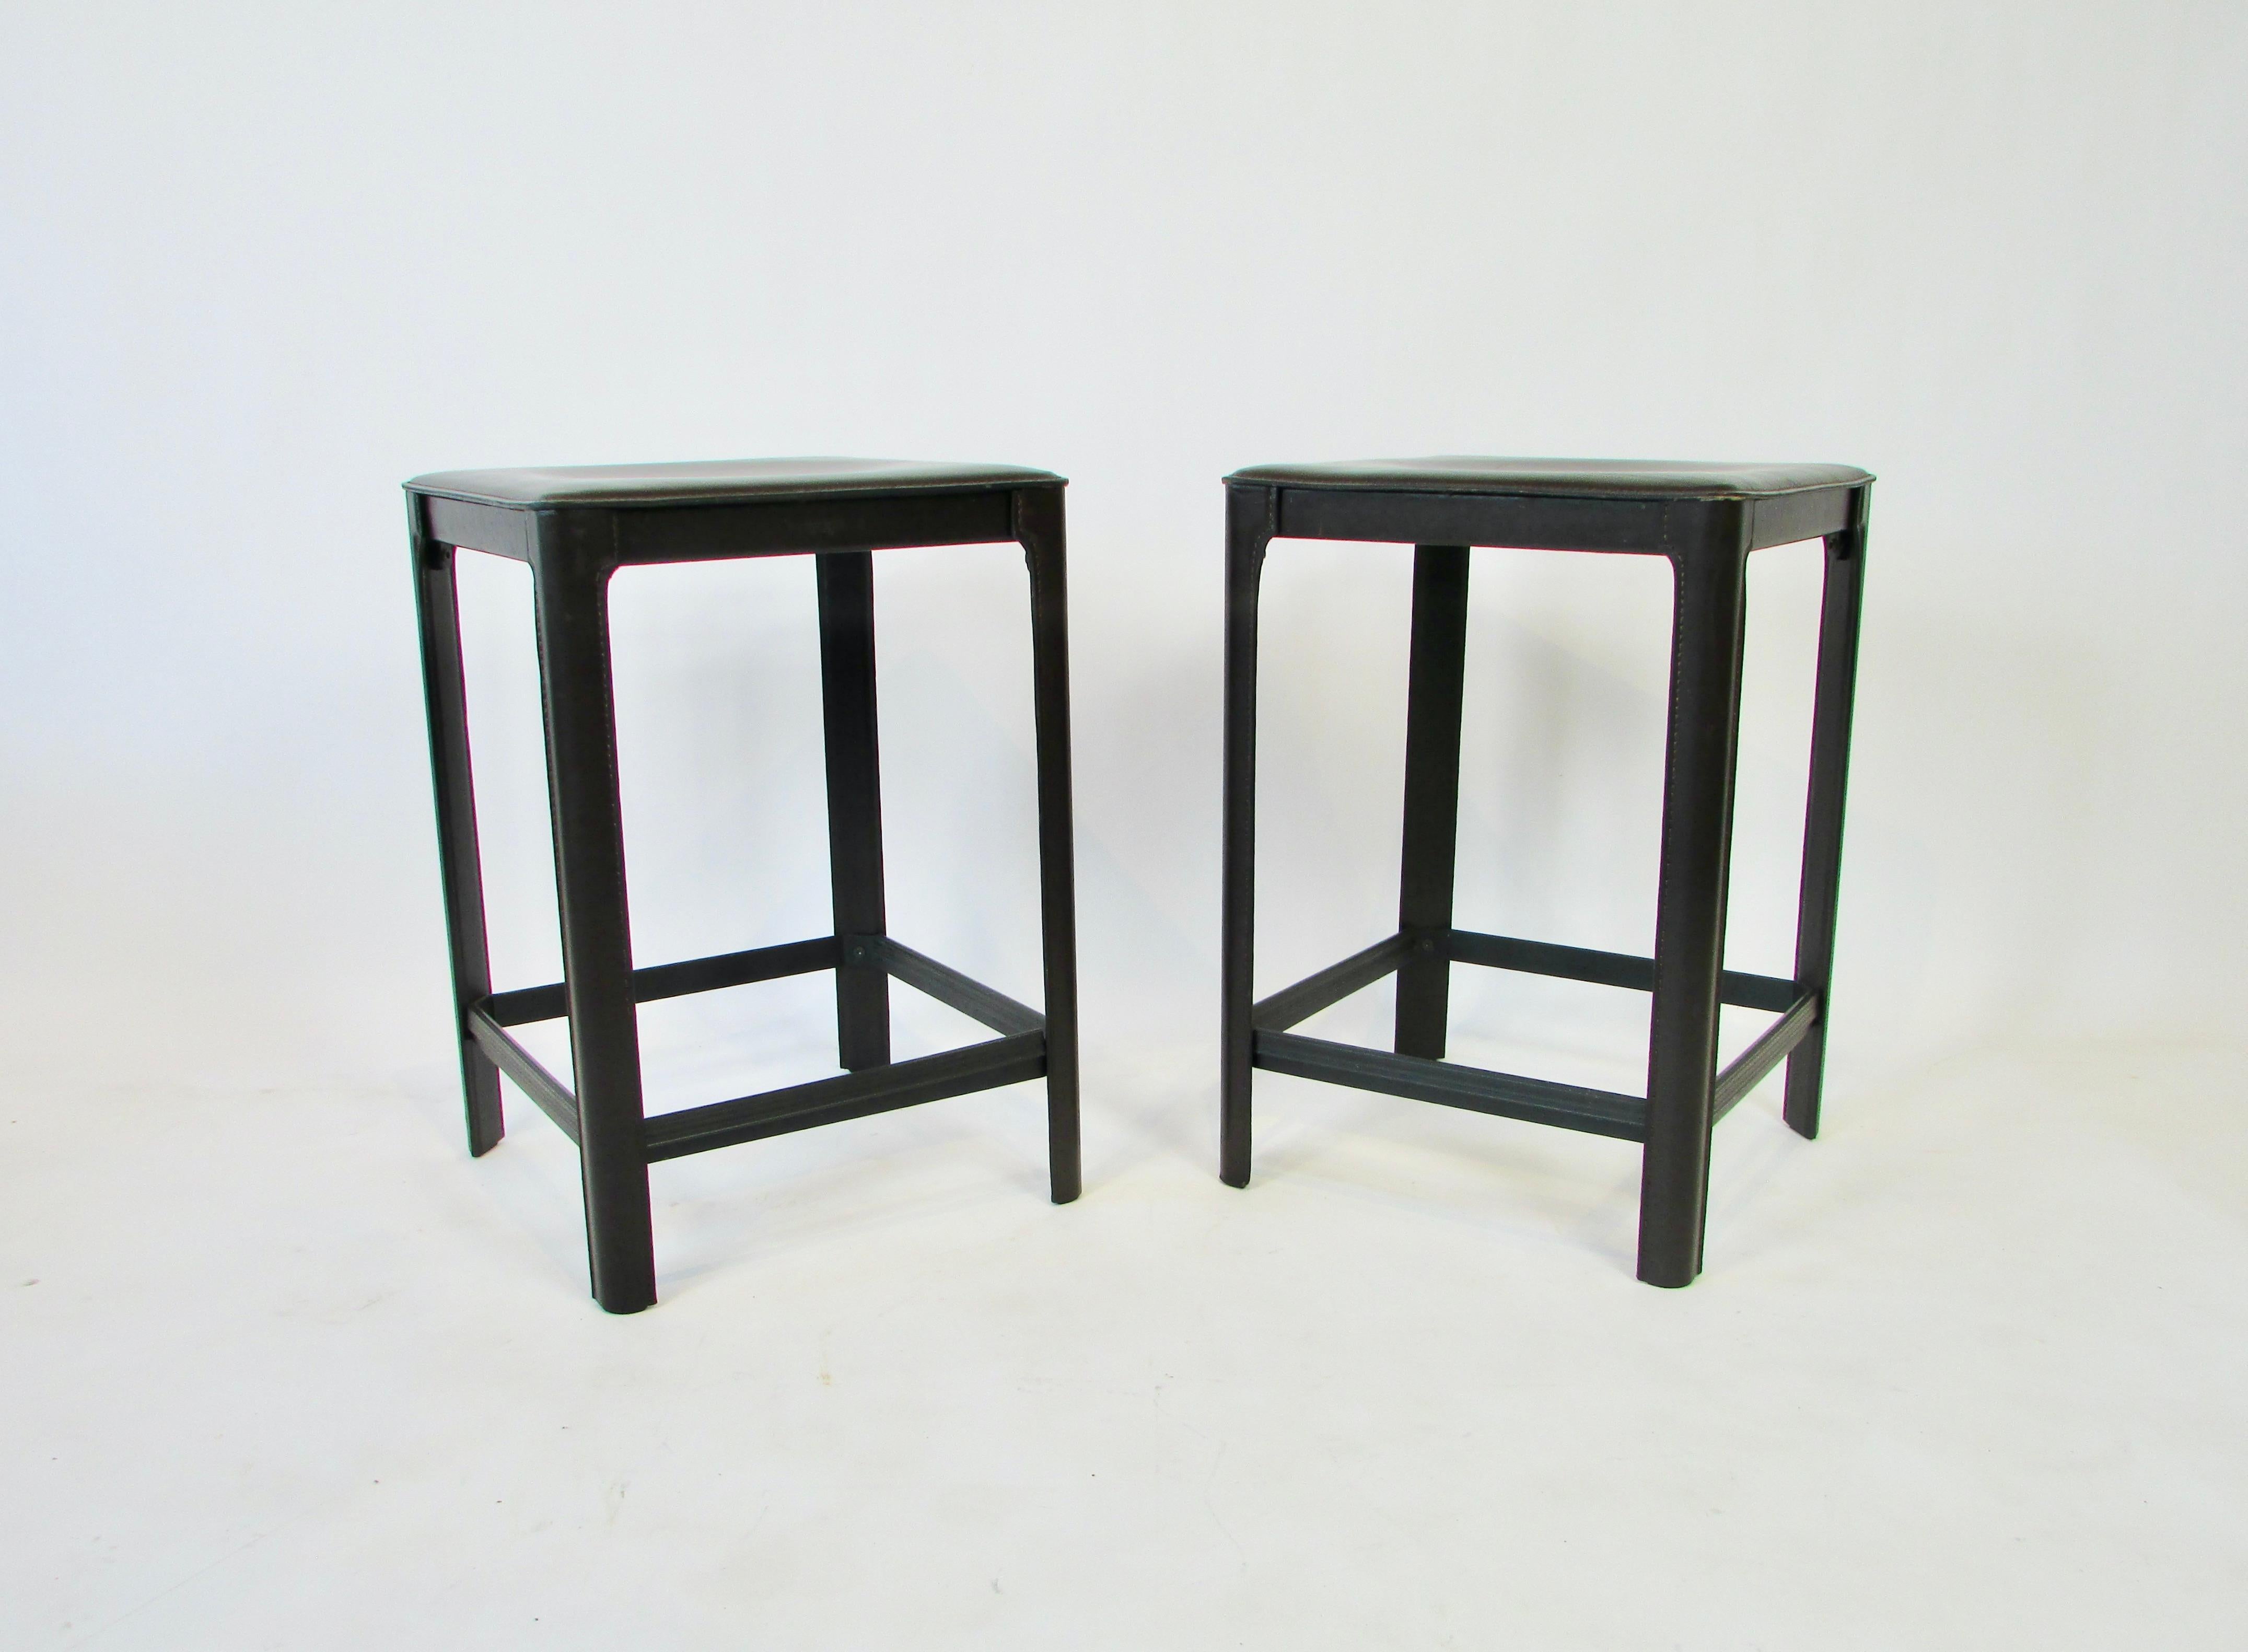 Clean original pair of Matteo Grassi stools. Postmodern 1970s stools in coffee tone leather The stools are completely covered in leather, stitched and molded on to the metal frame. Very nice condition.